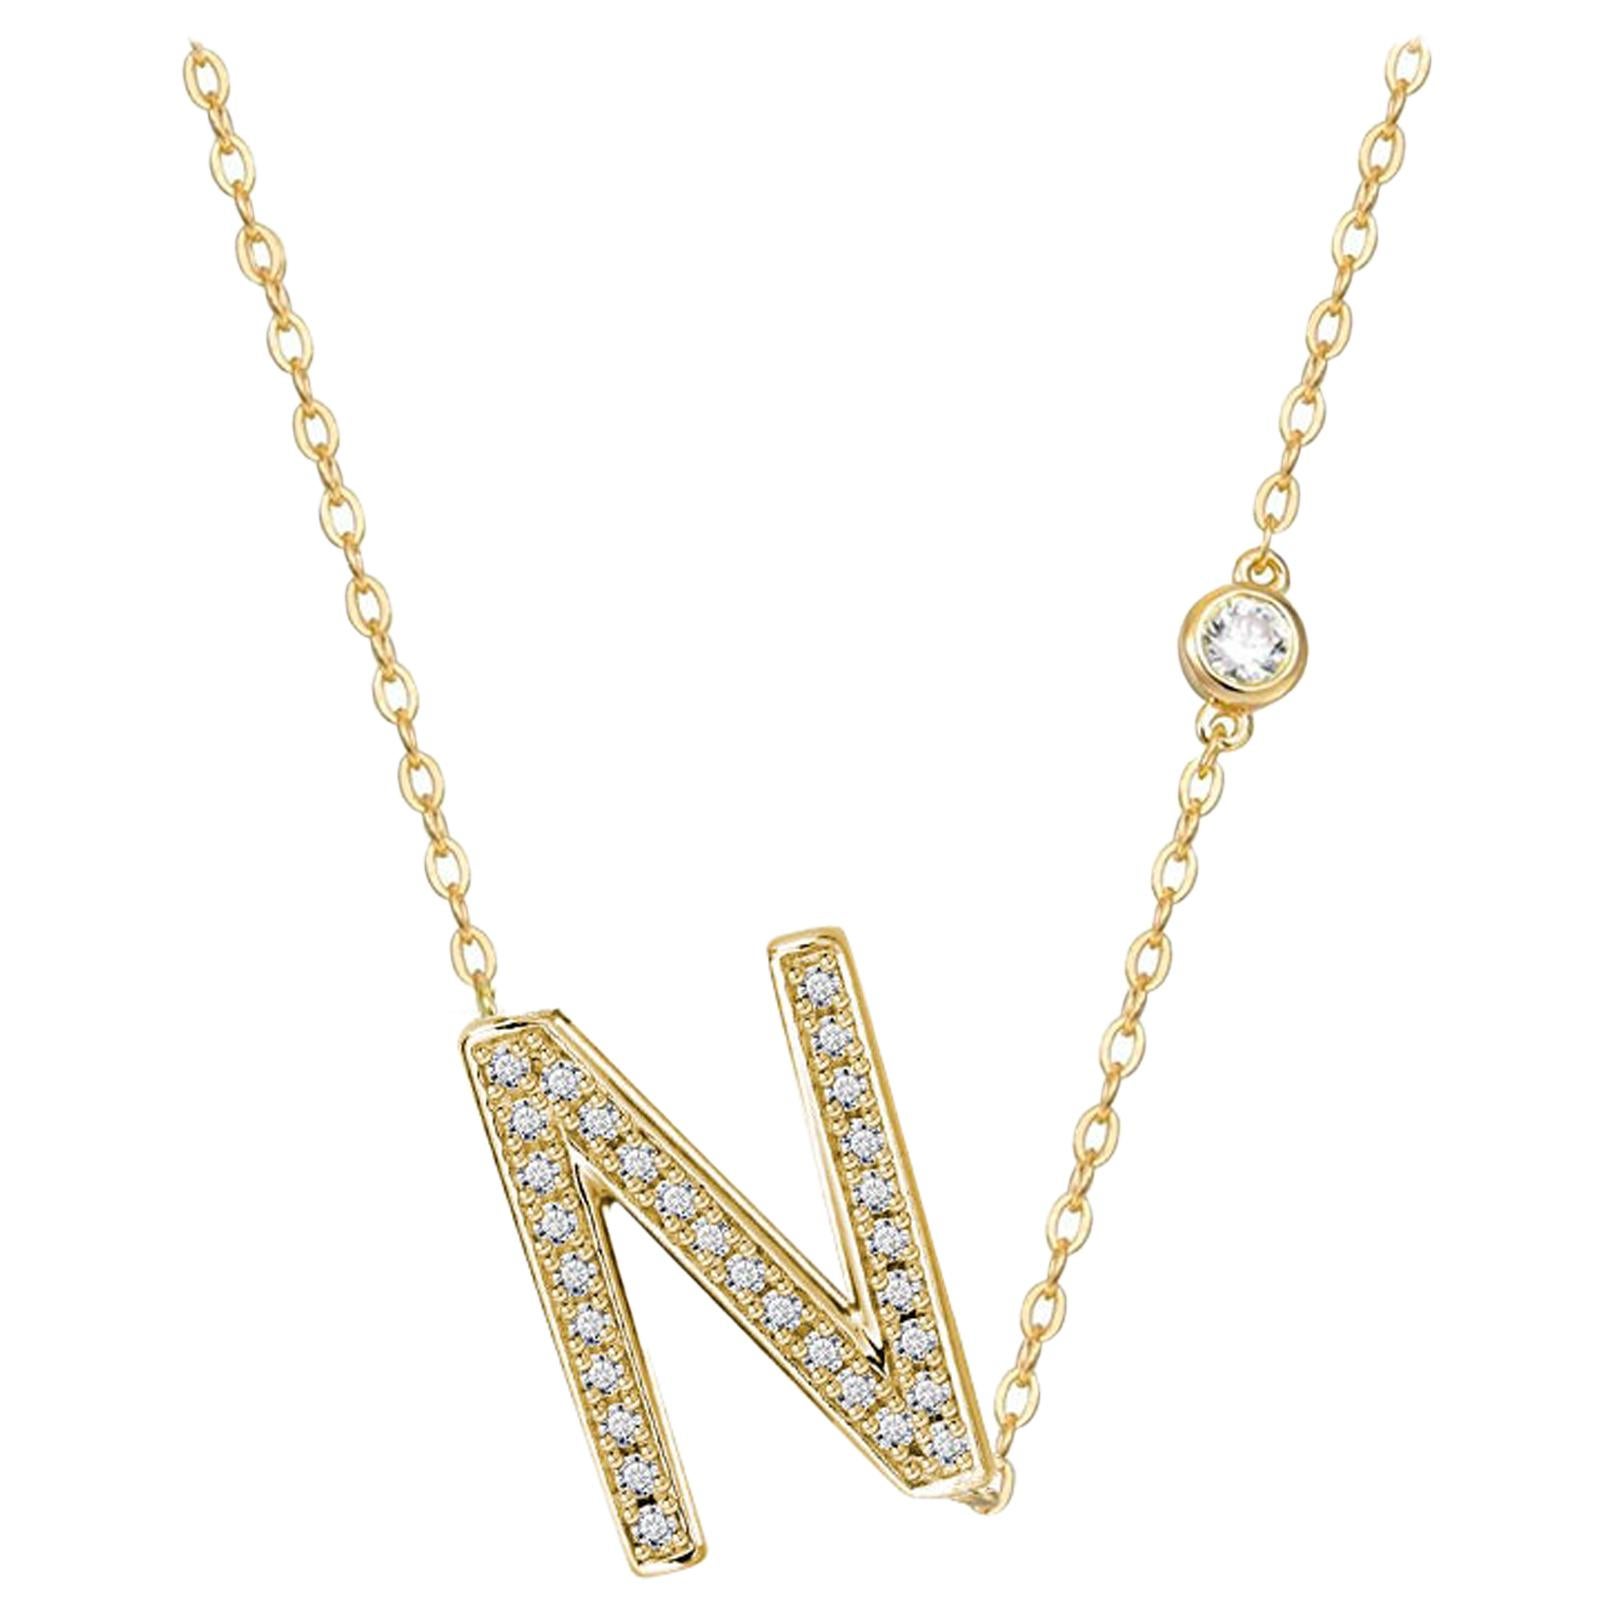 N Initial Bezel Chain Necklace For Sale